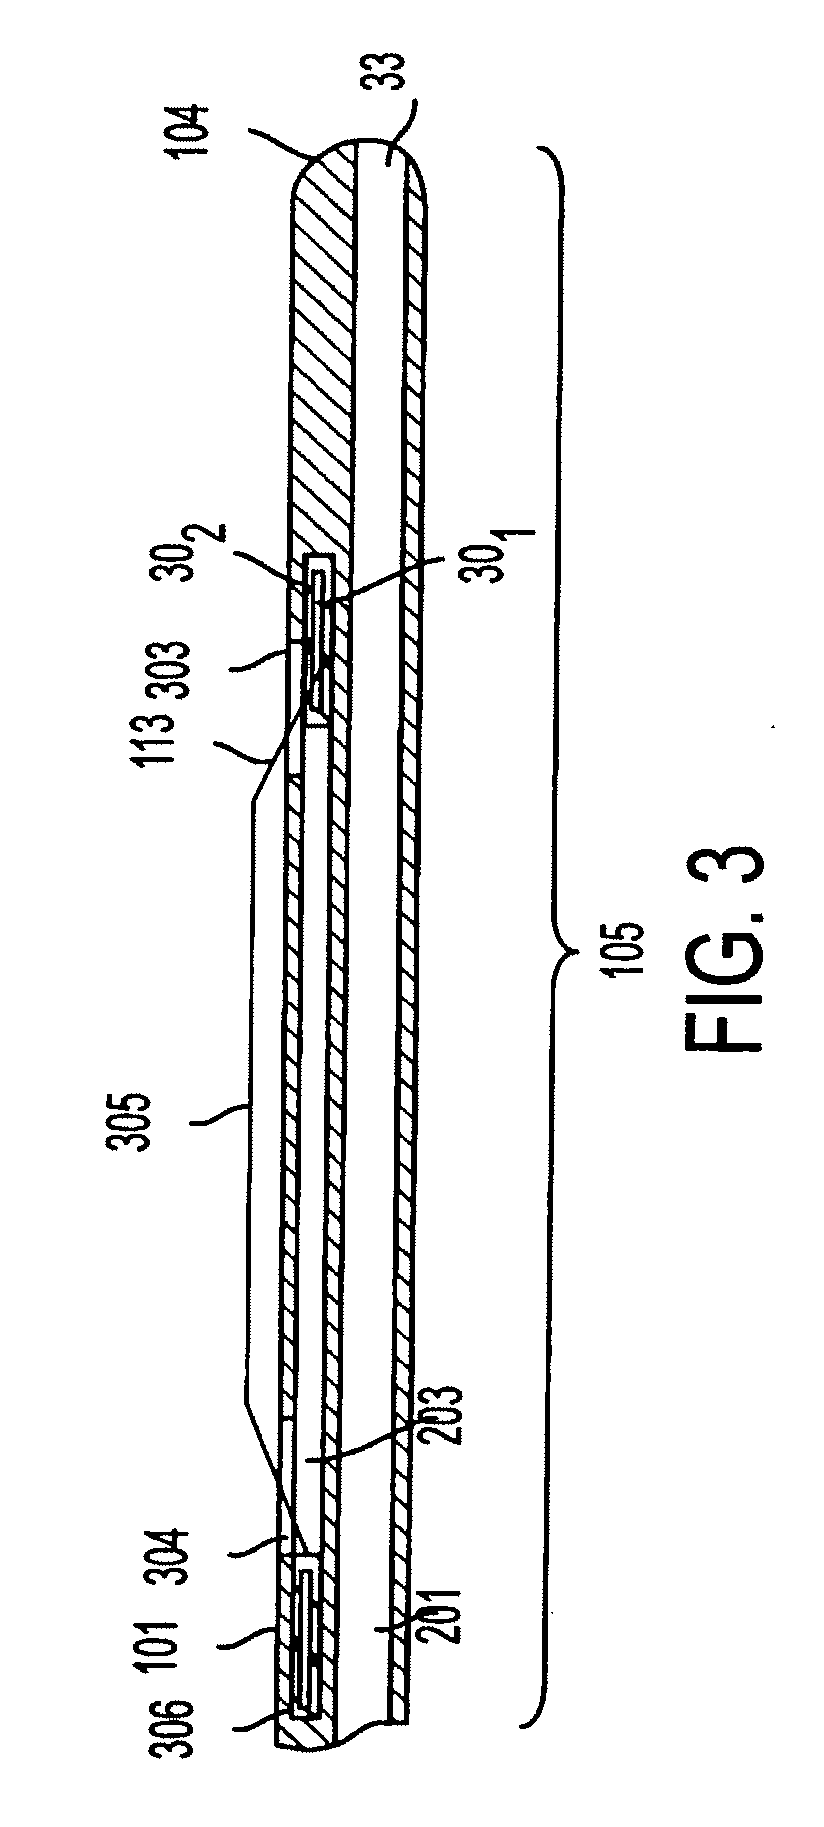 Method and Apparatus for Measuring and Controlling Blade Depth of a Tissue Cutting Apparatus in an Endoscopic Catheter